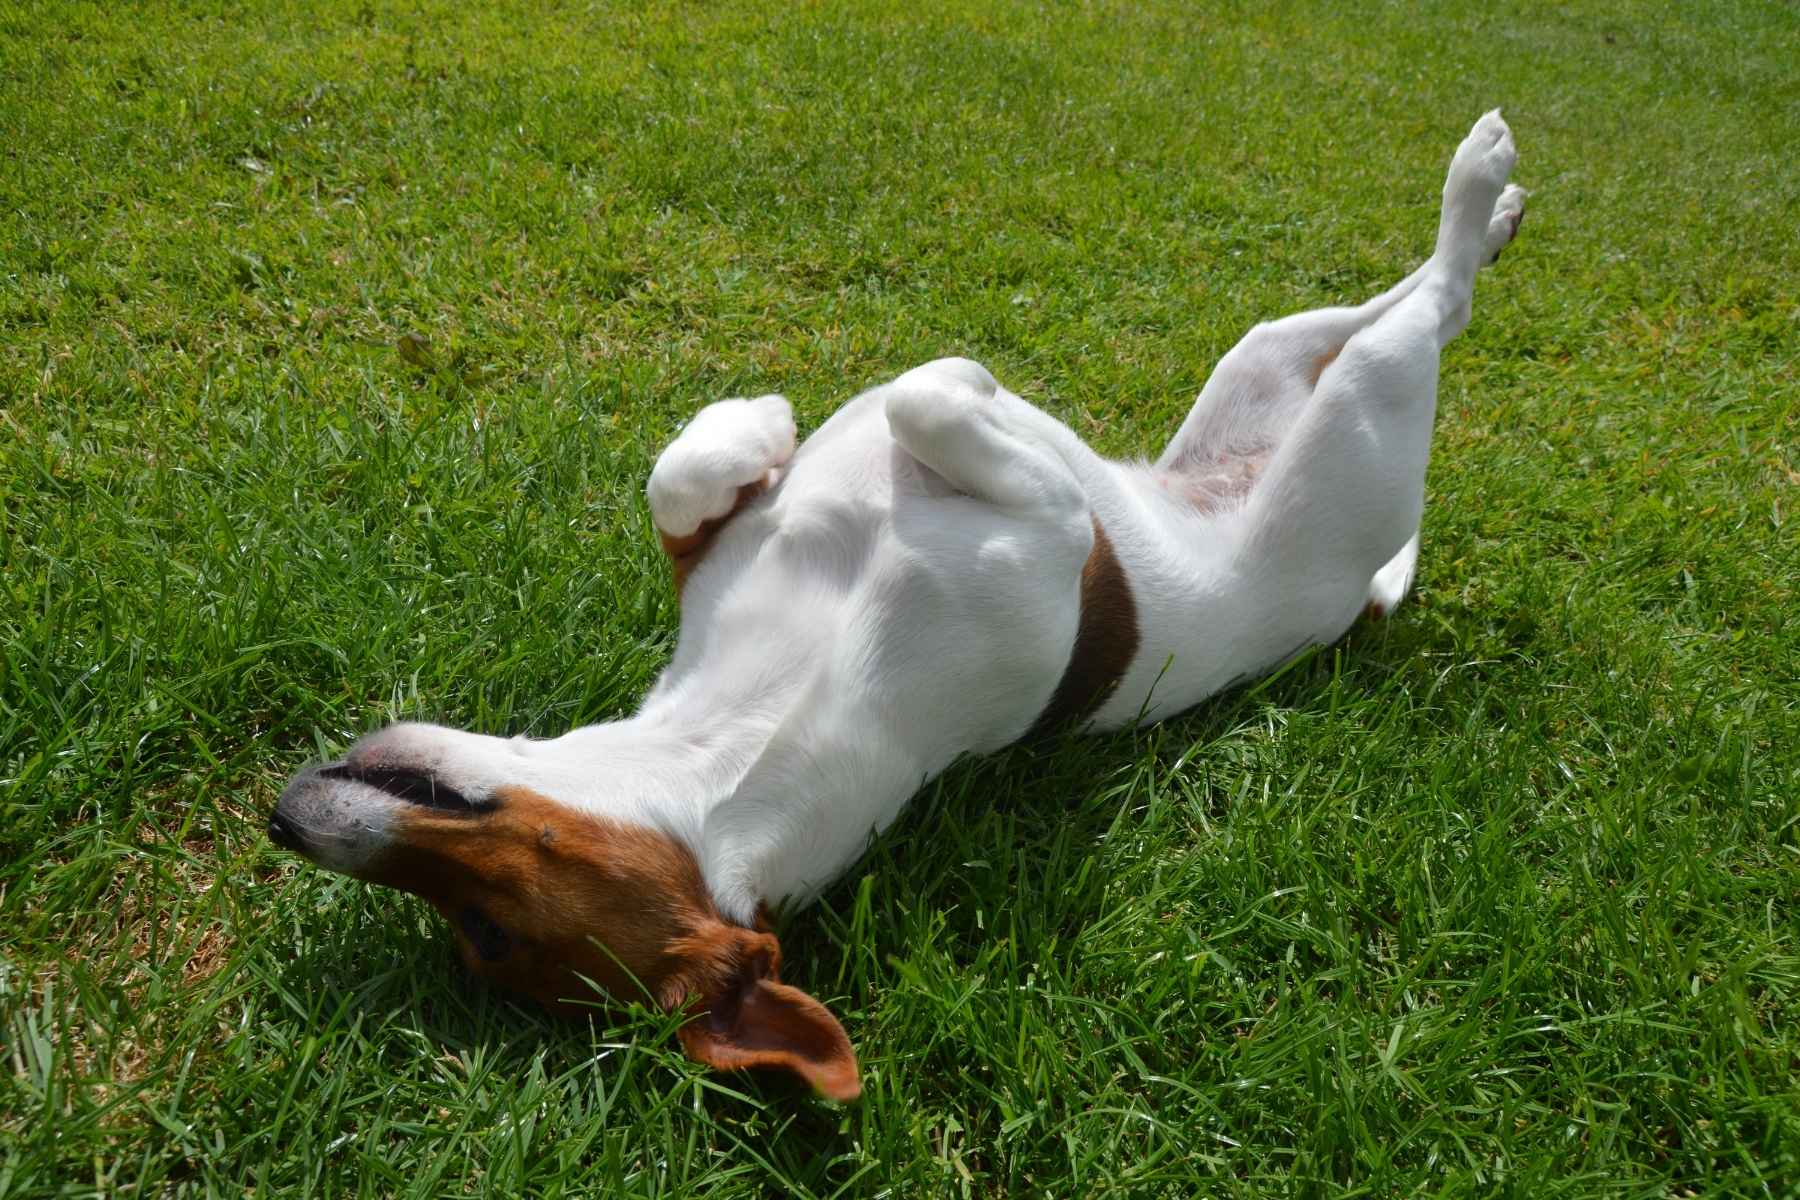 Dog playing dead on the lawn